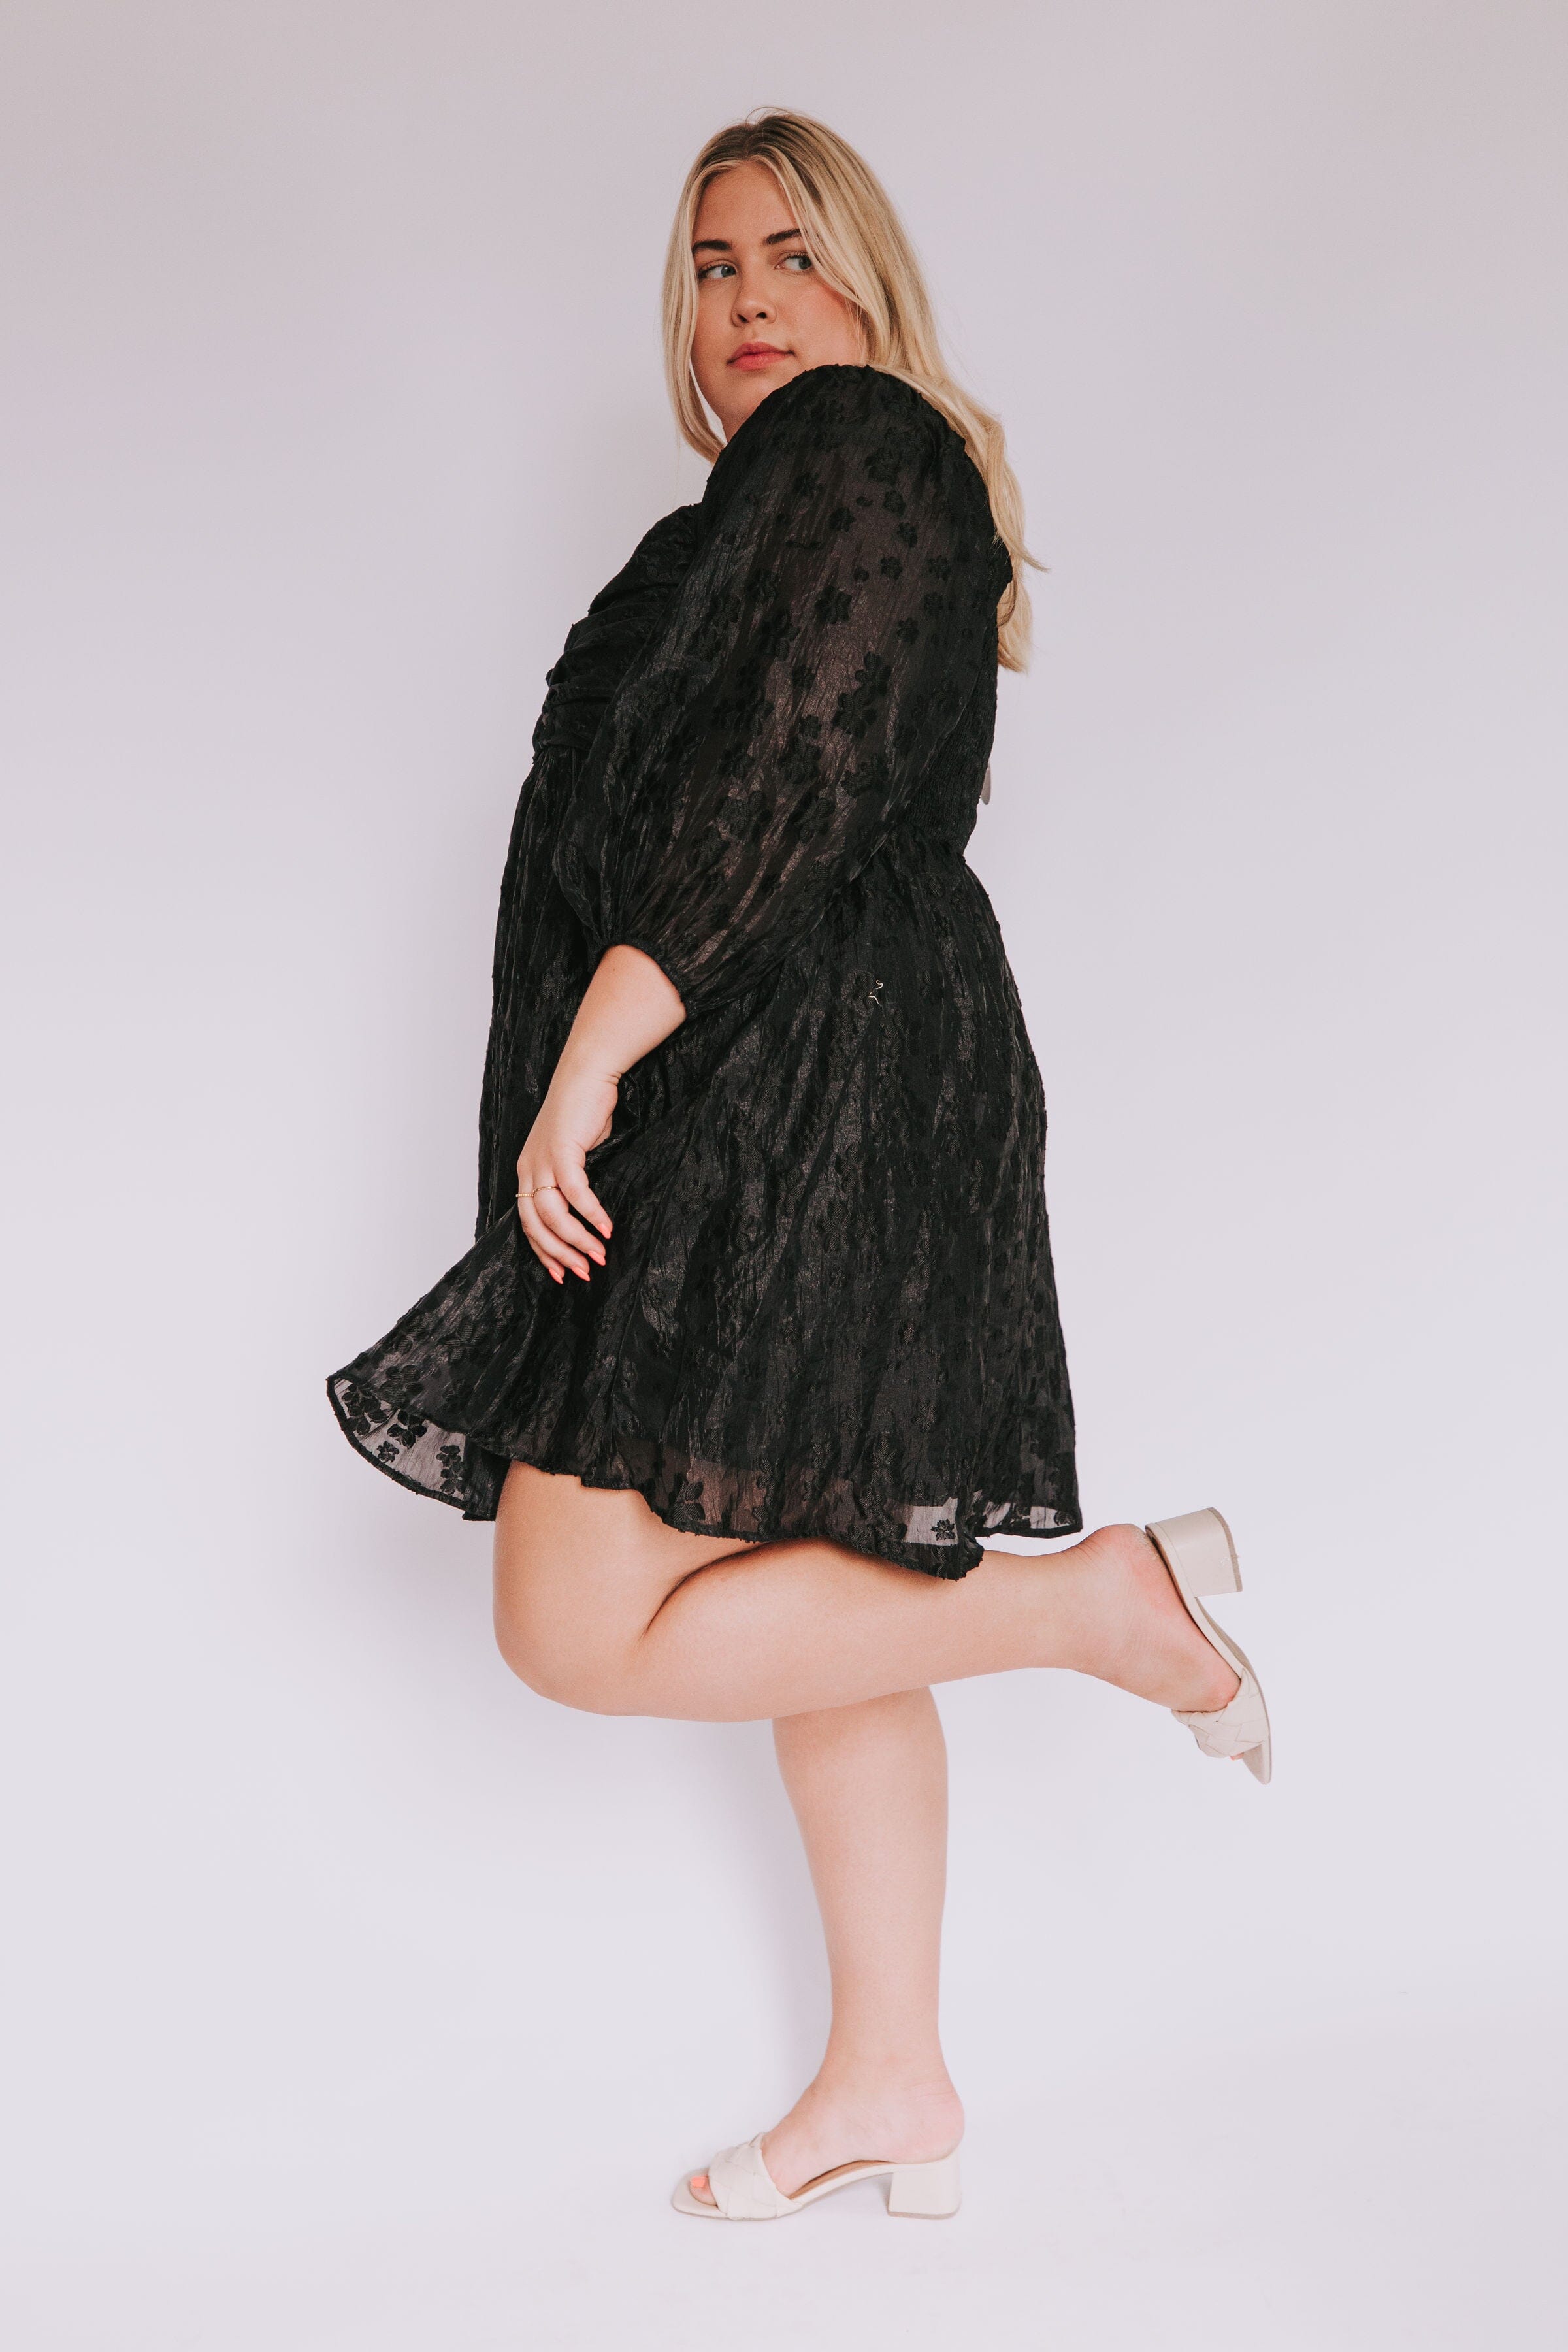 PLUS SIZE - All About You Dress 